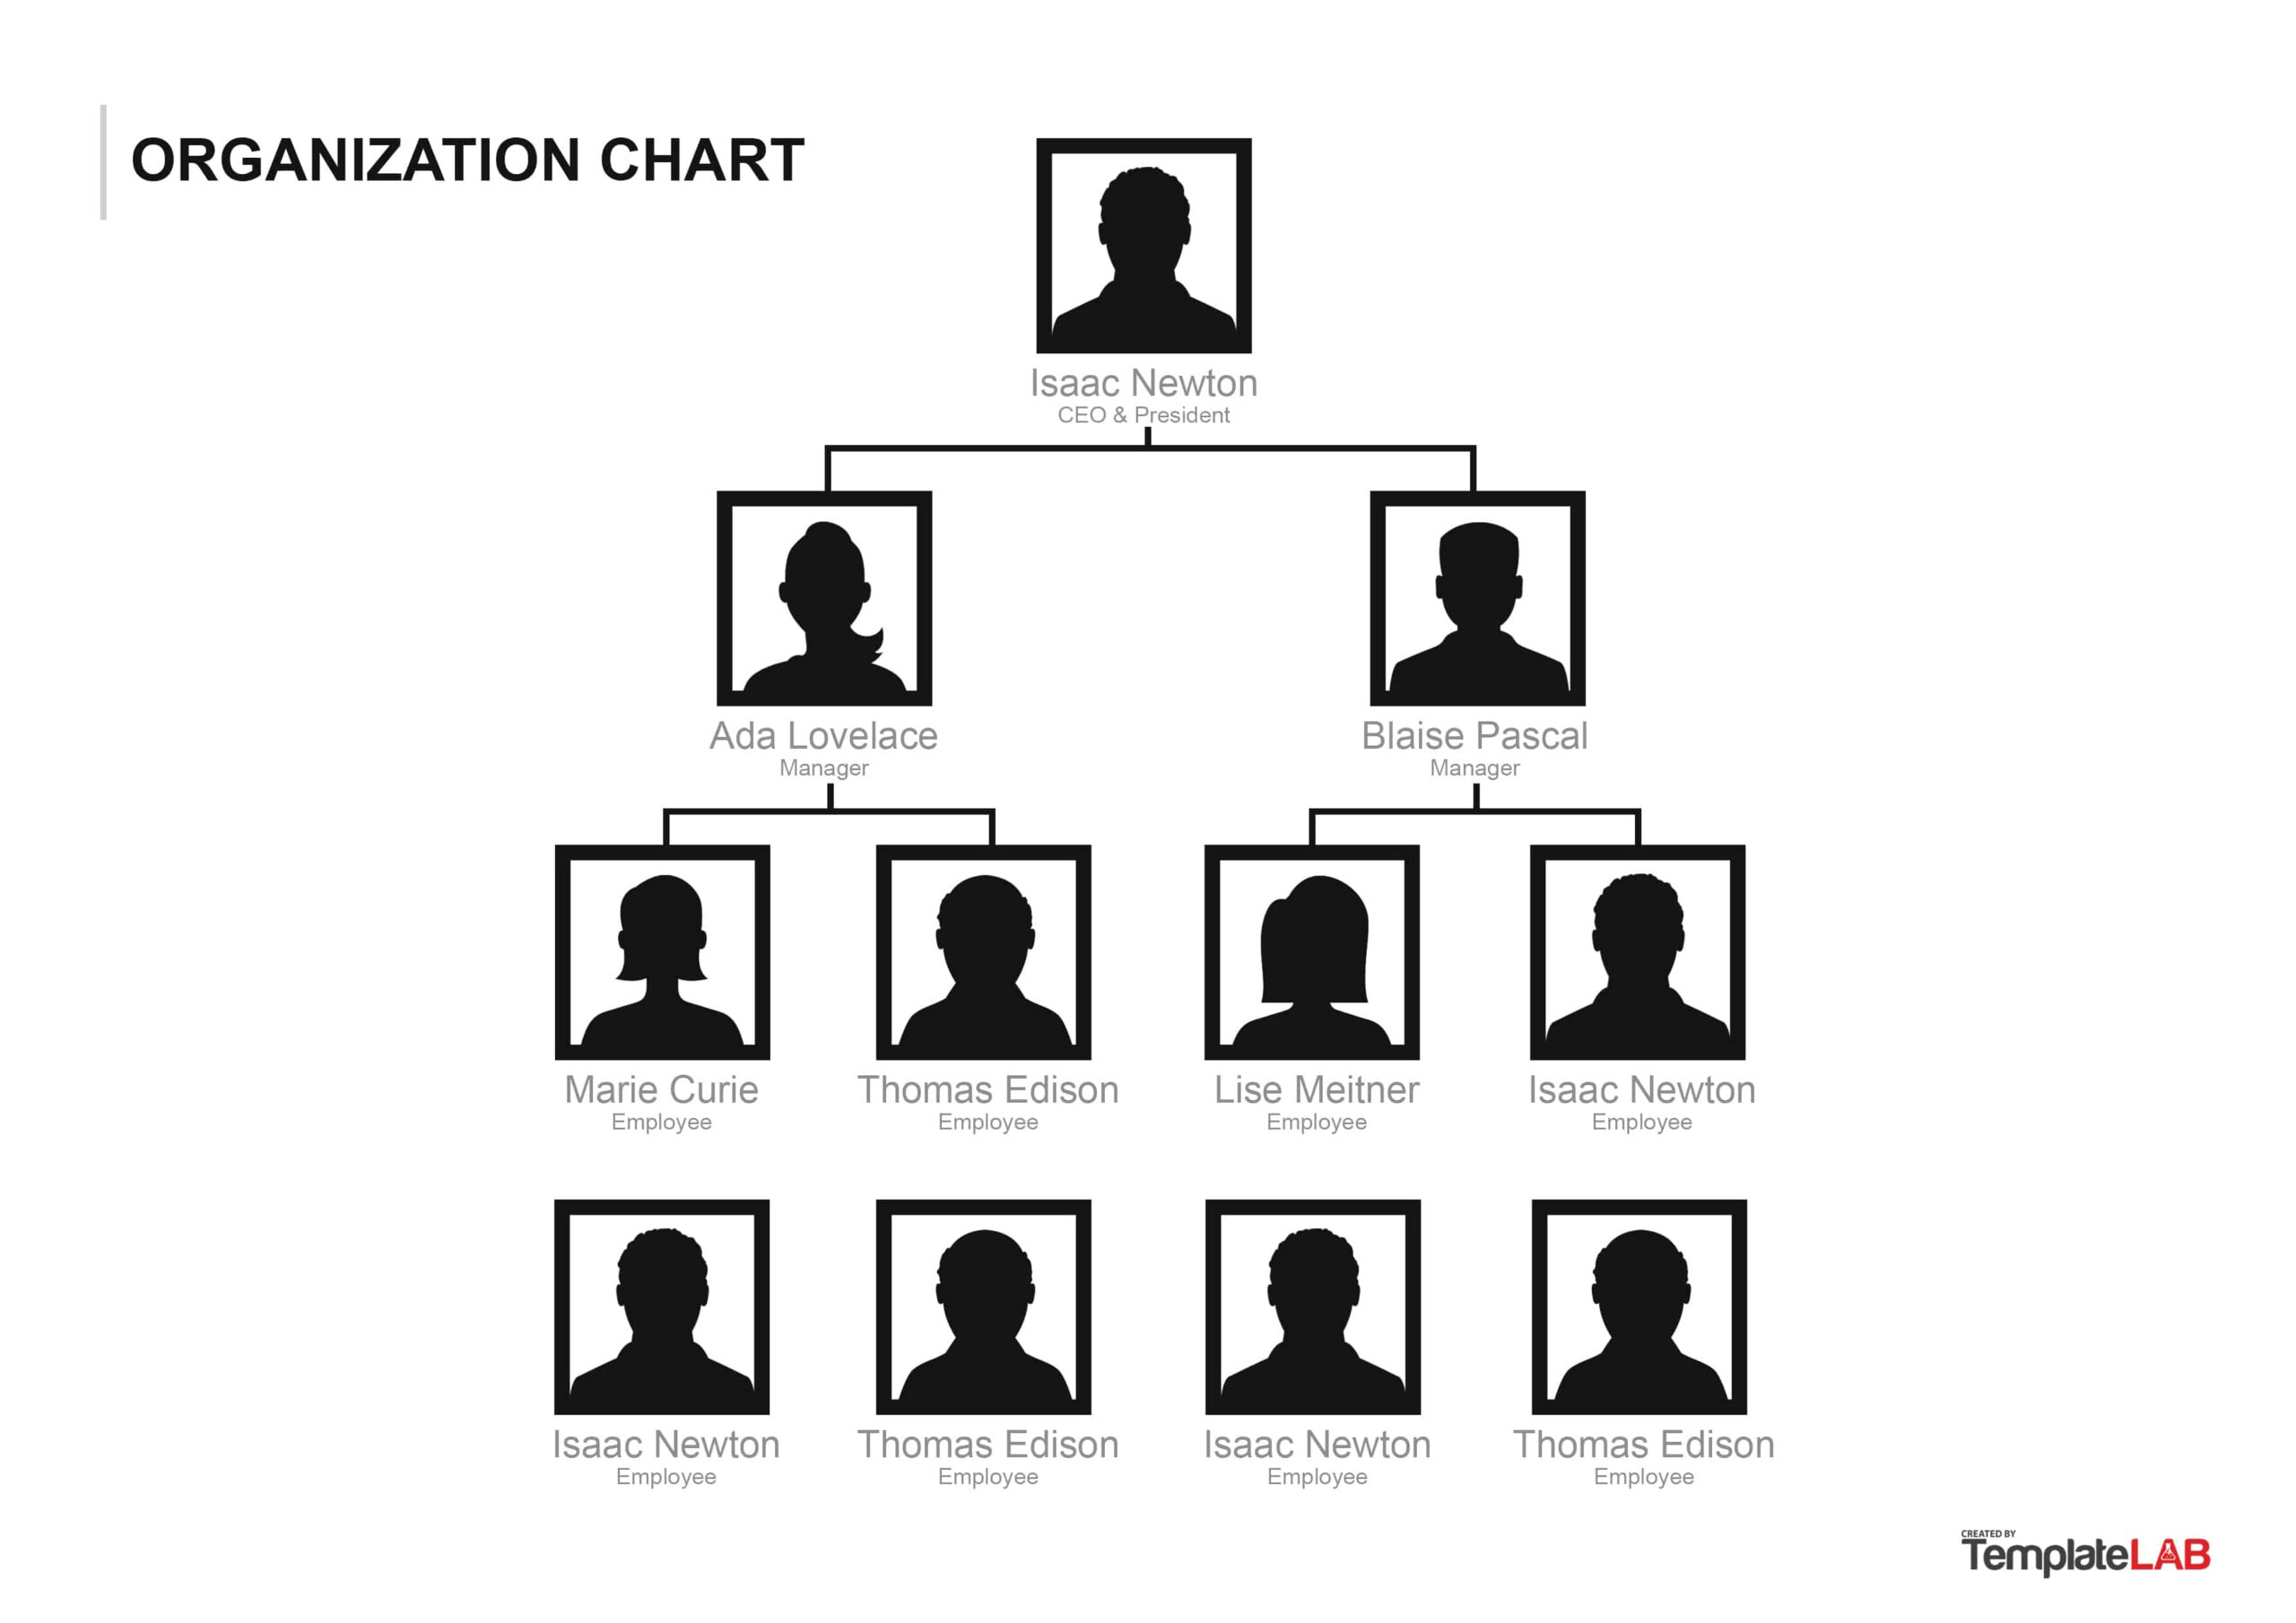 40 Organizational Chart Templates (Word, Excel, Powerpoint) Pertaining To Organization Chart Template Word